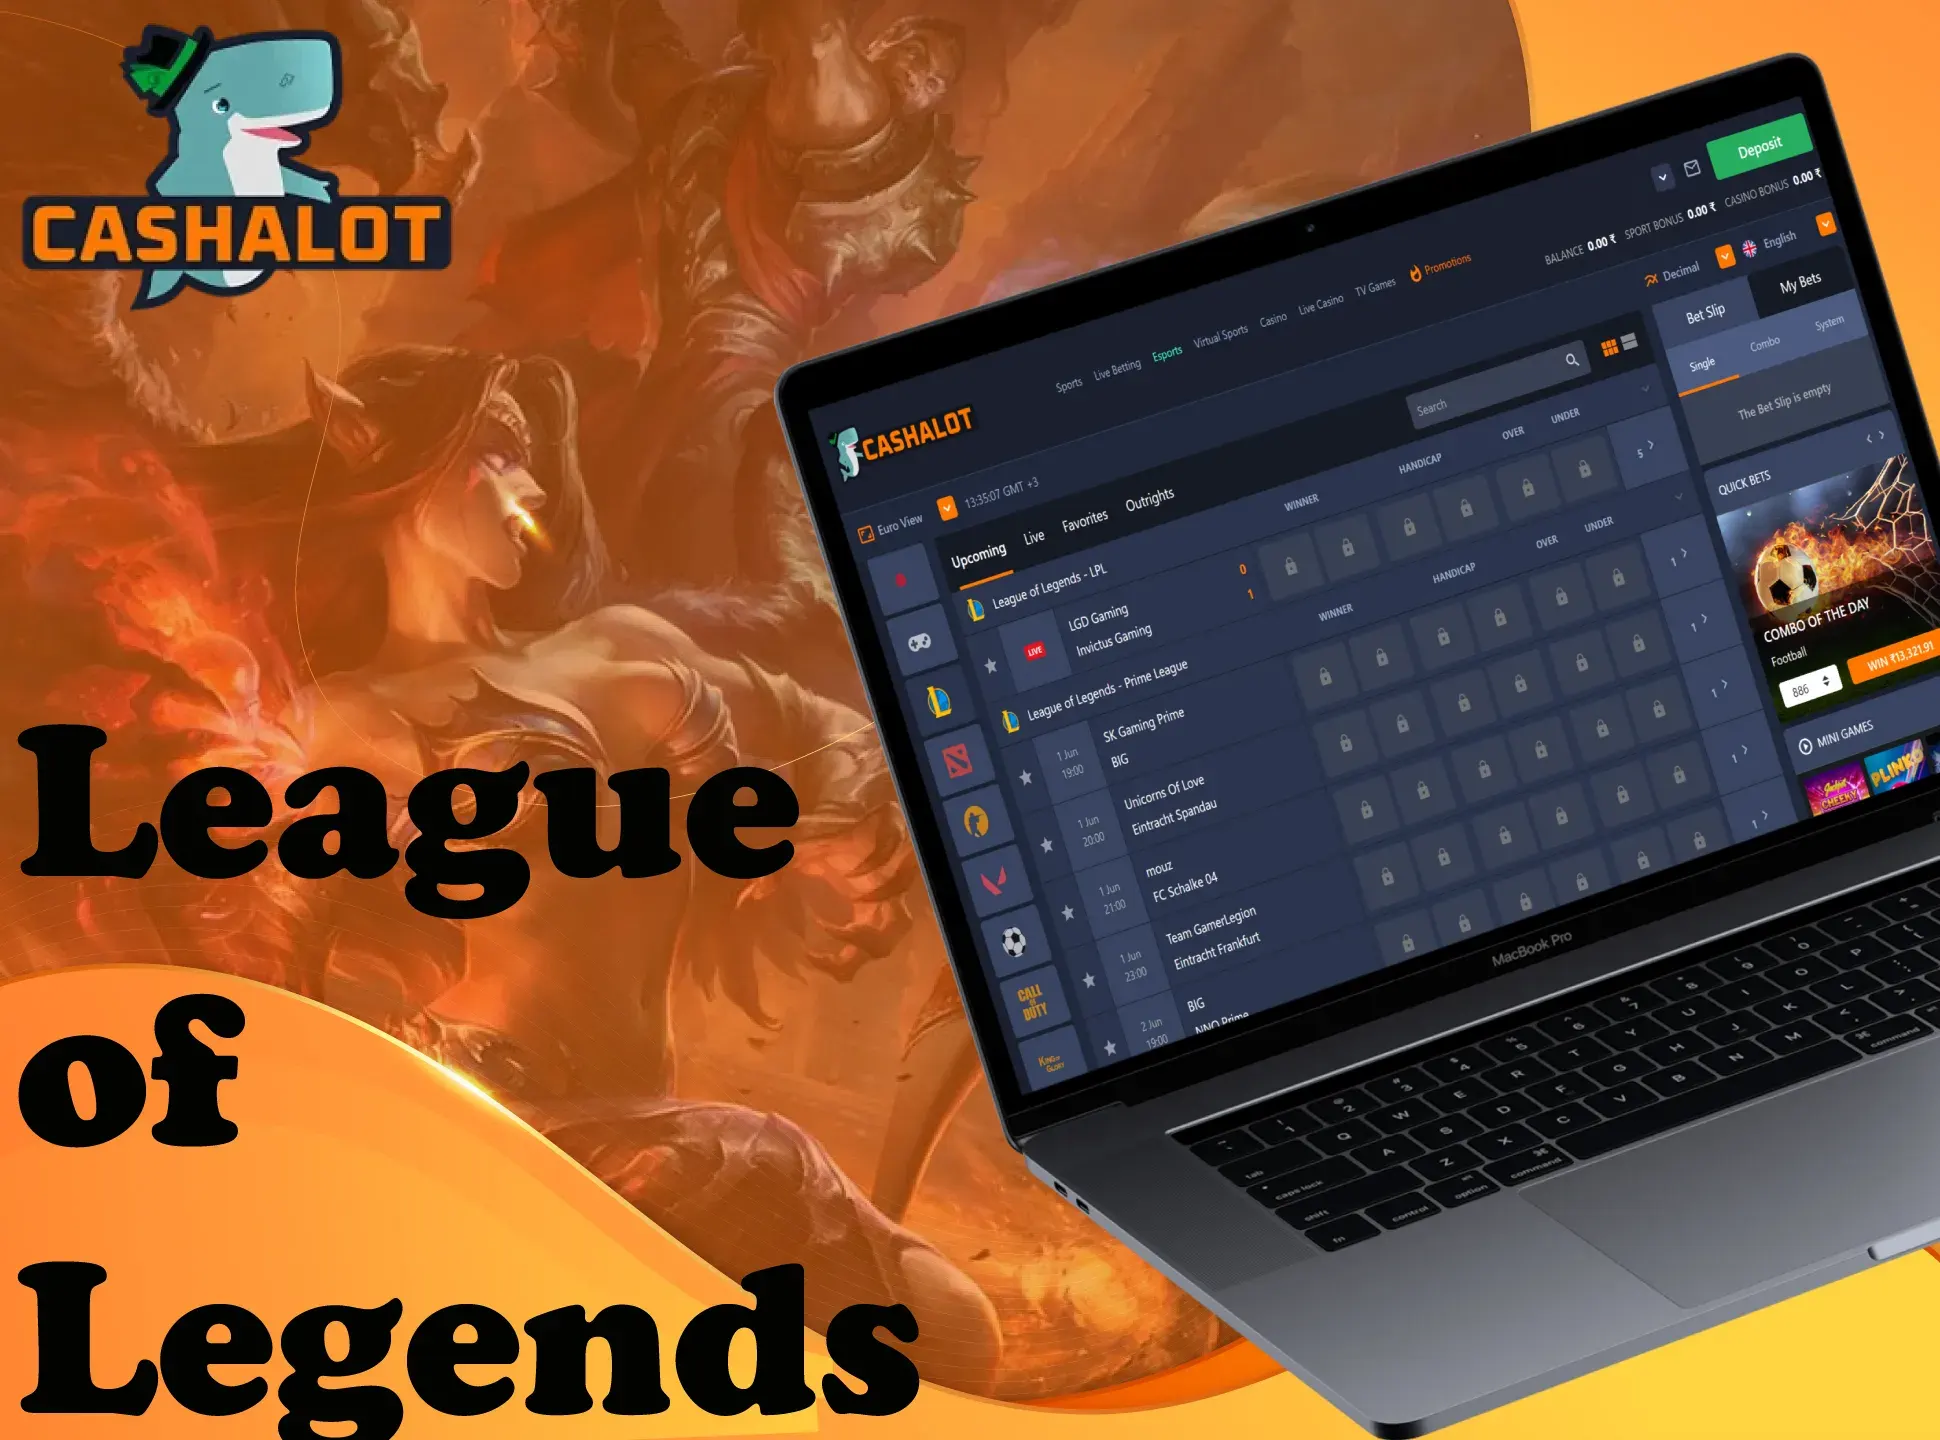 Bet on League of Legends matches on the Cashalot website and win money.